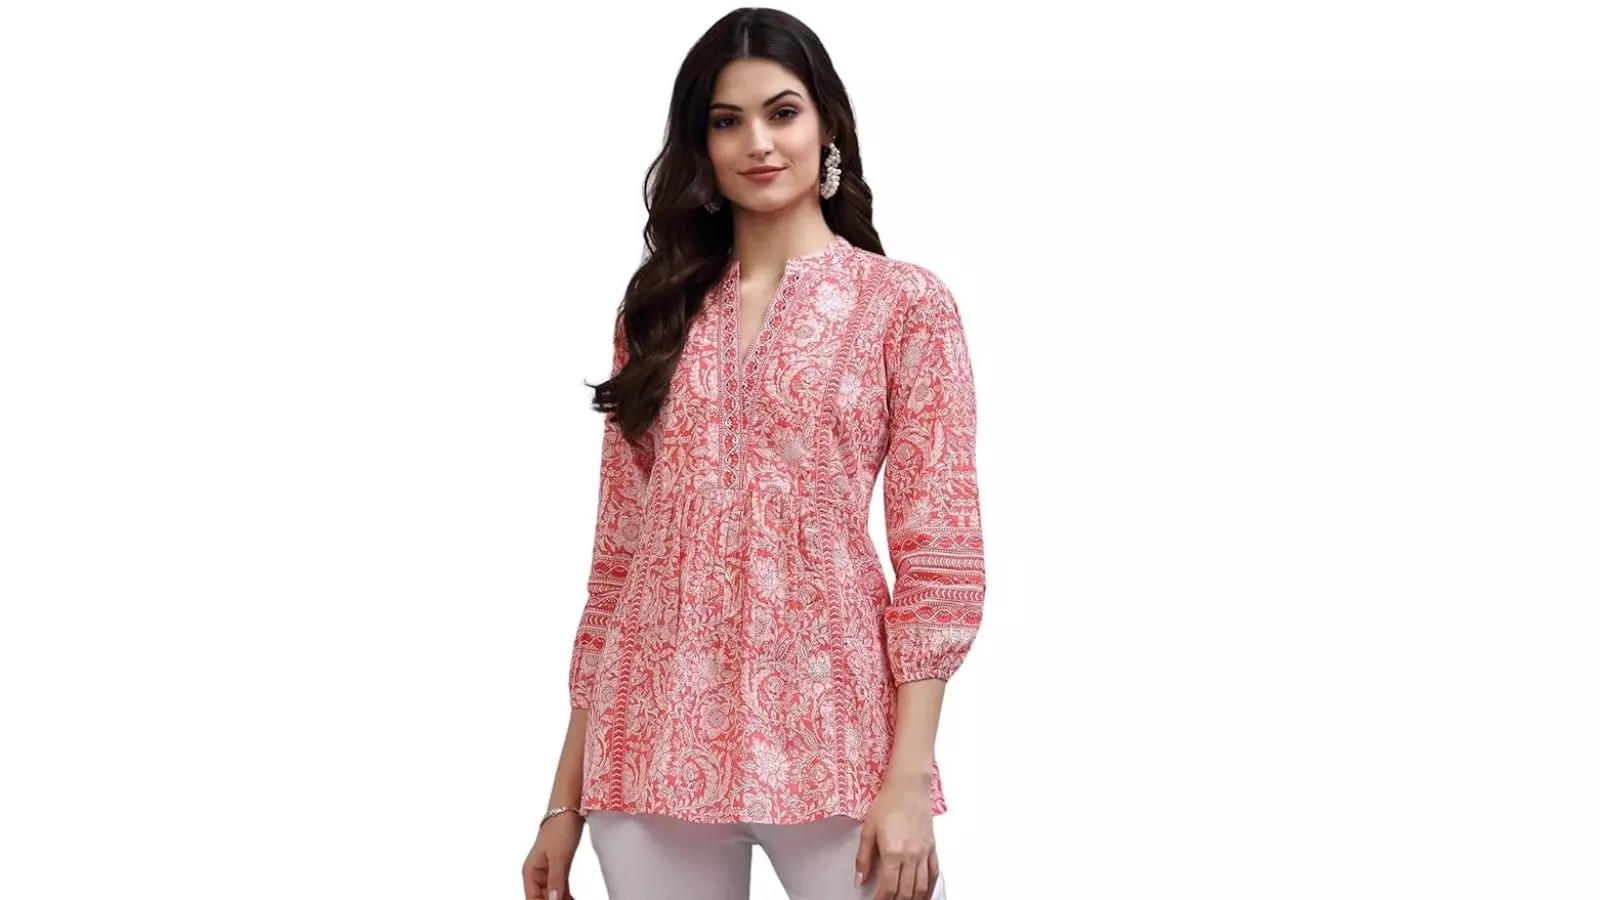 Rytras Womens Floral Printed Cotton Top